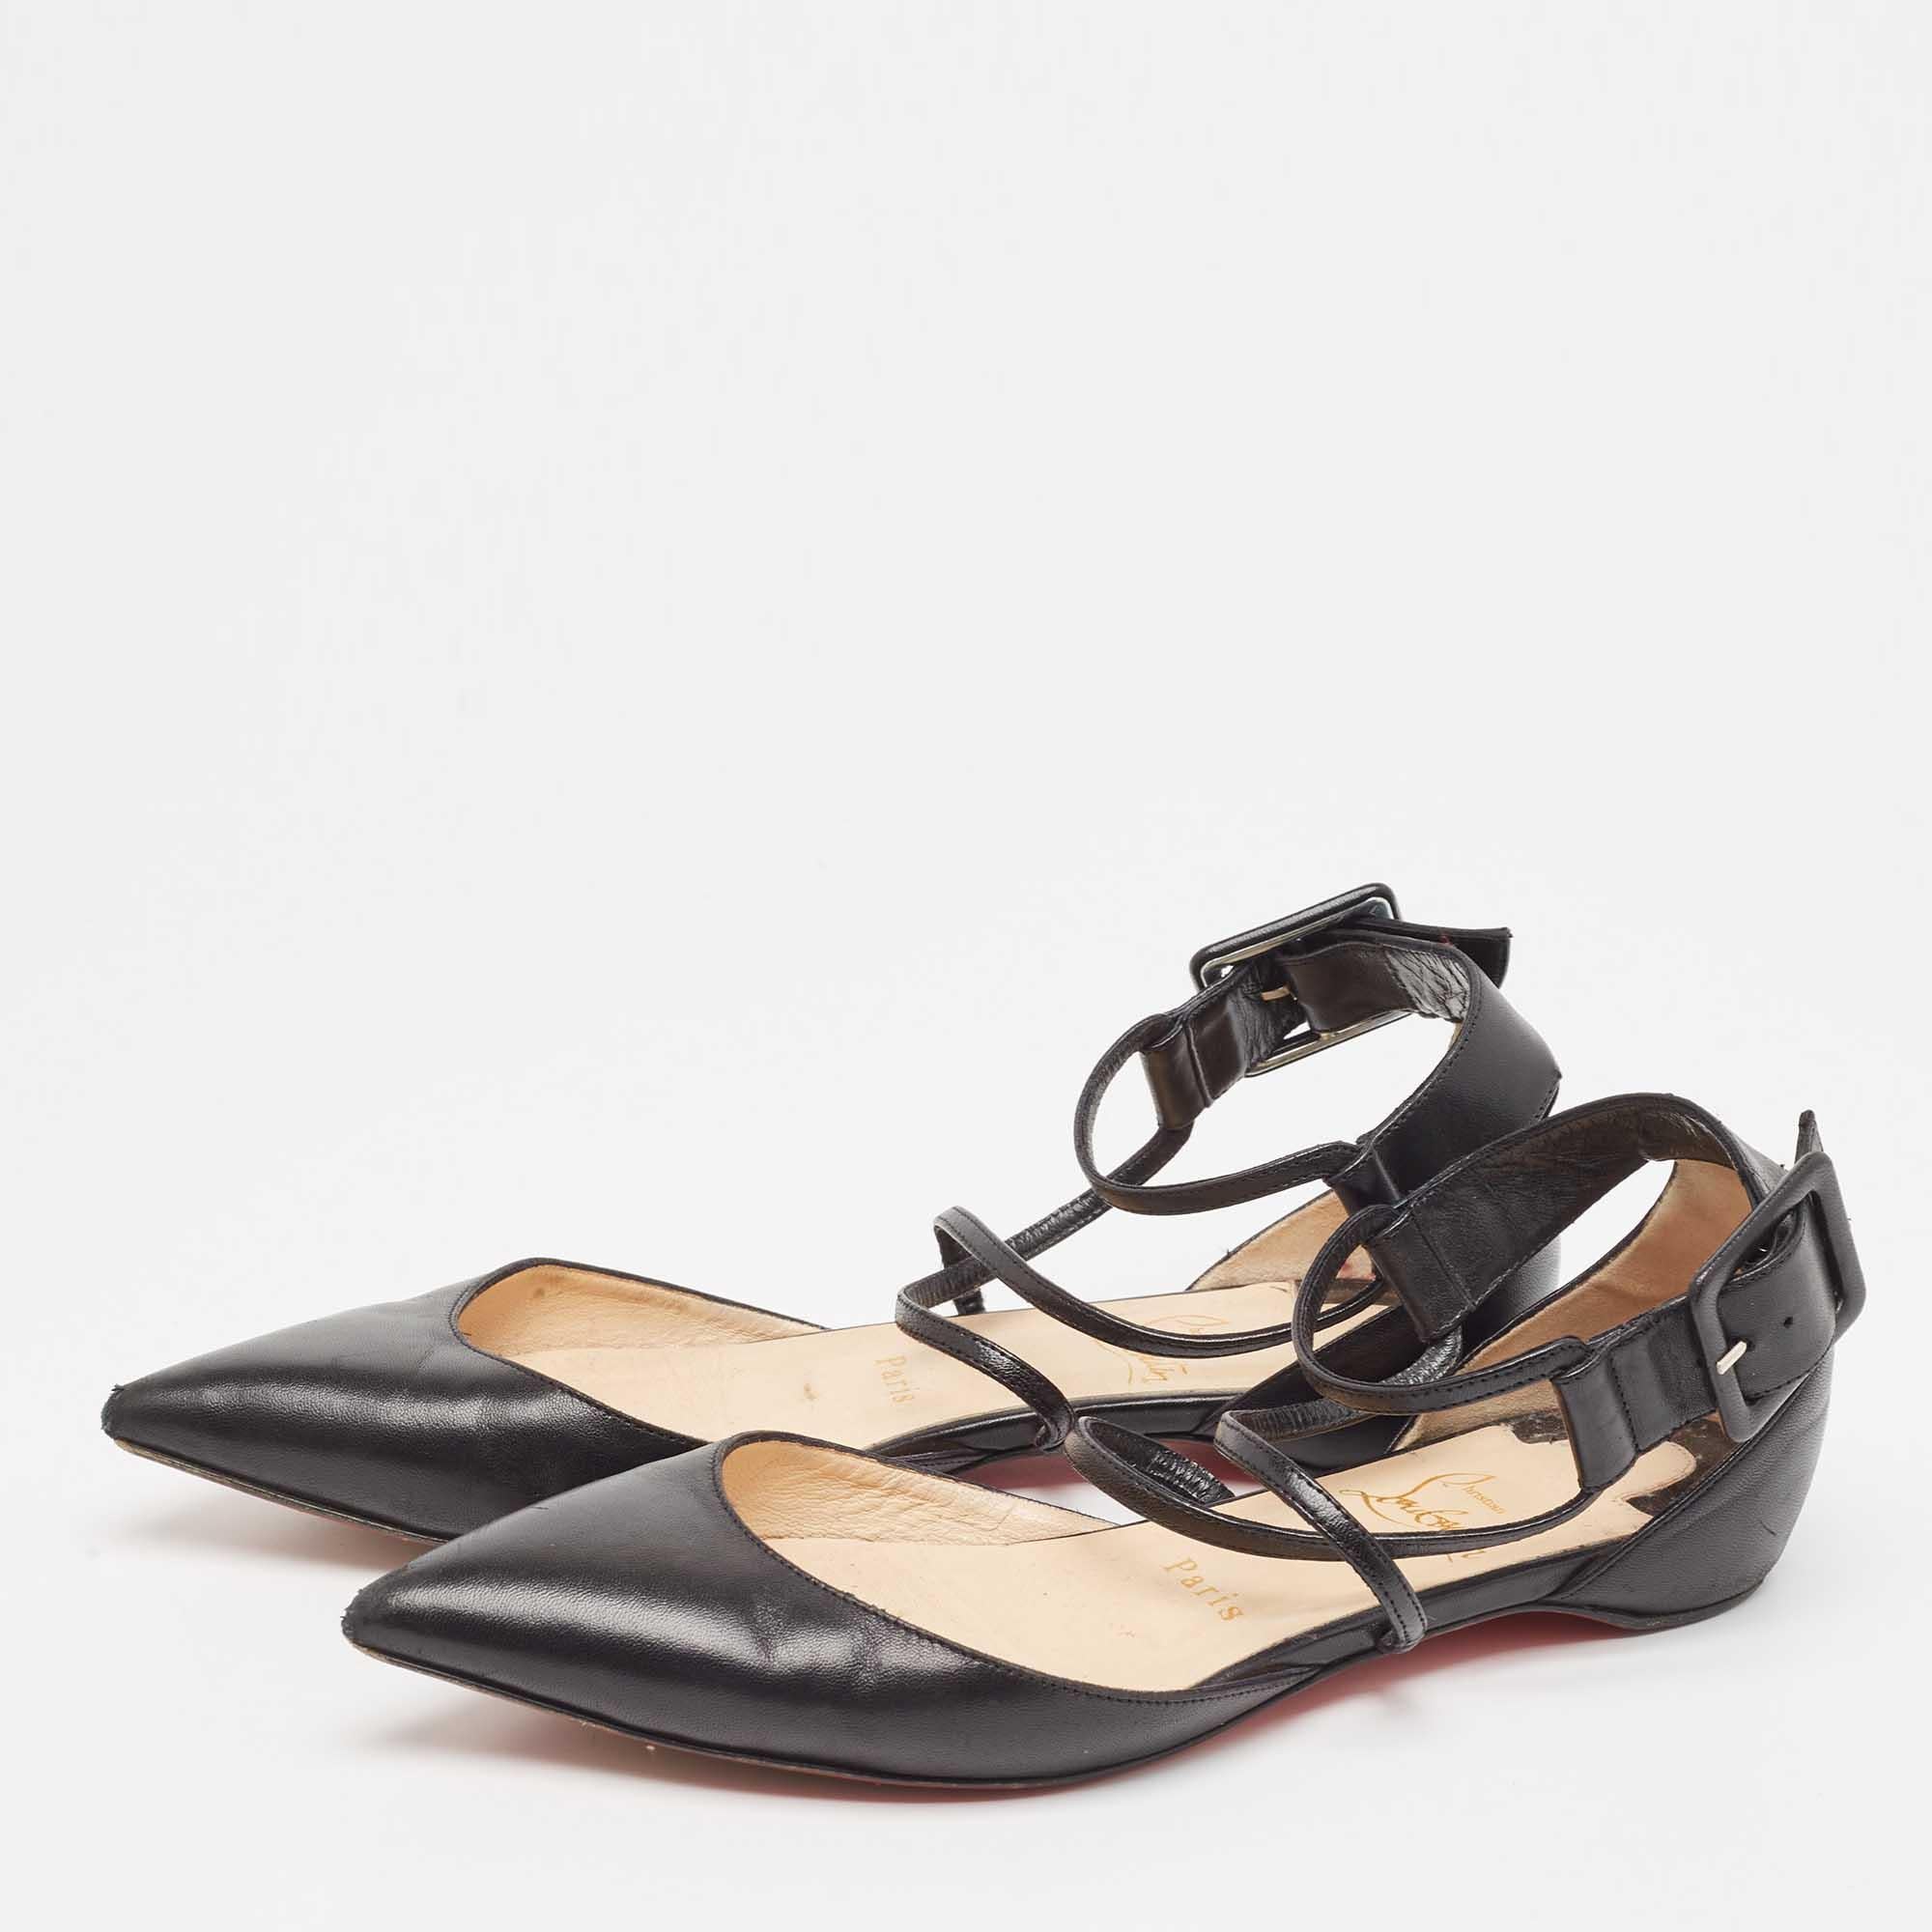 Christian Louboutin Black Leather Suzanna Ankle Strap Flats Size 37.5 For Sale 5